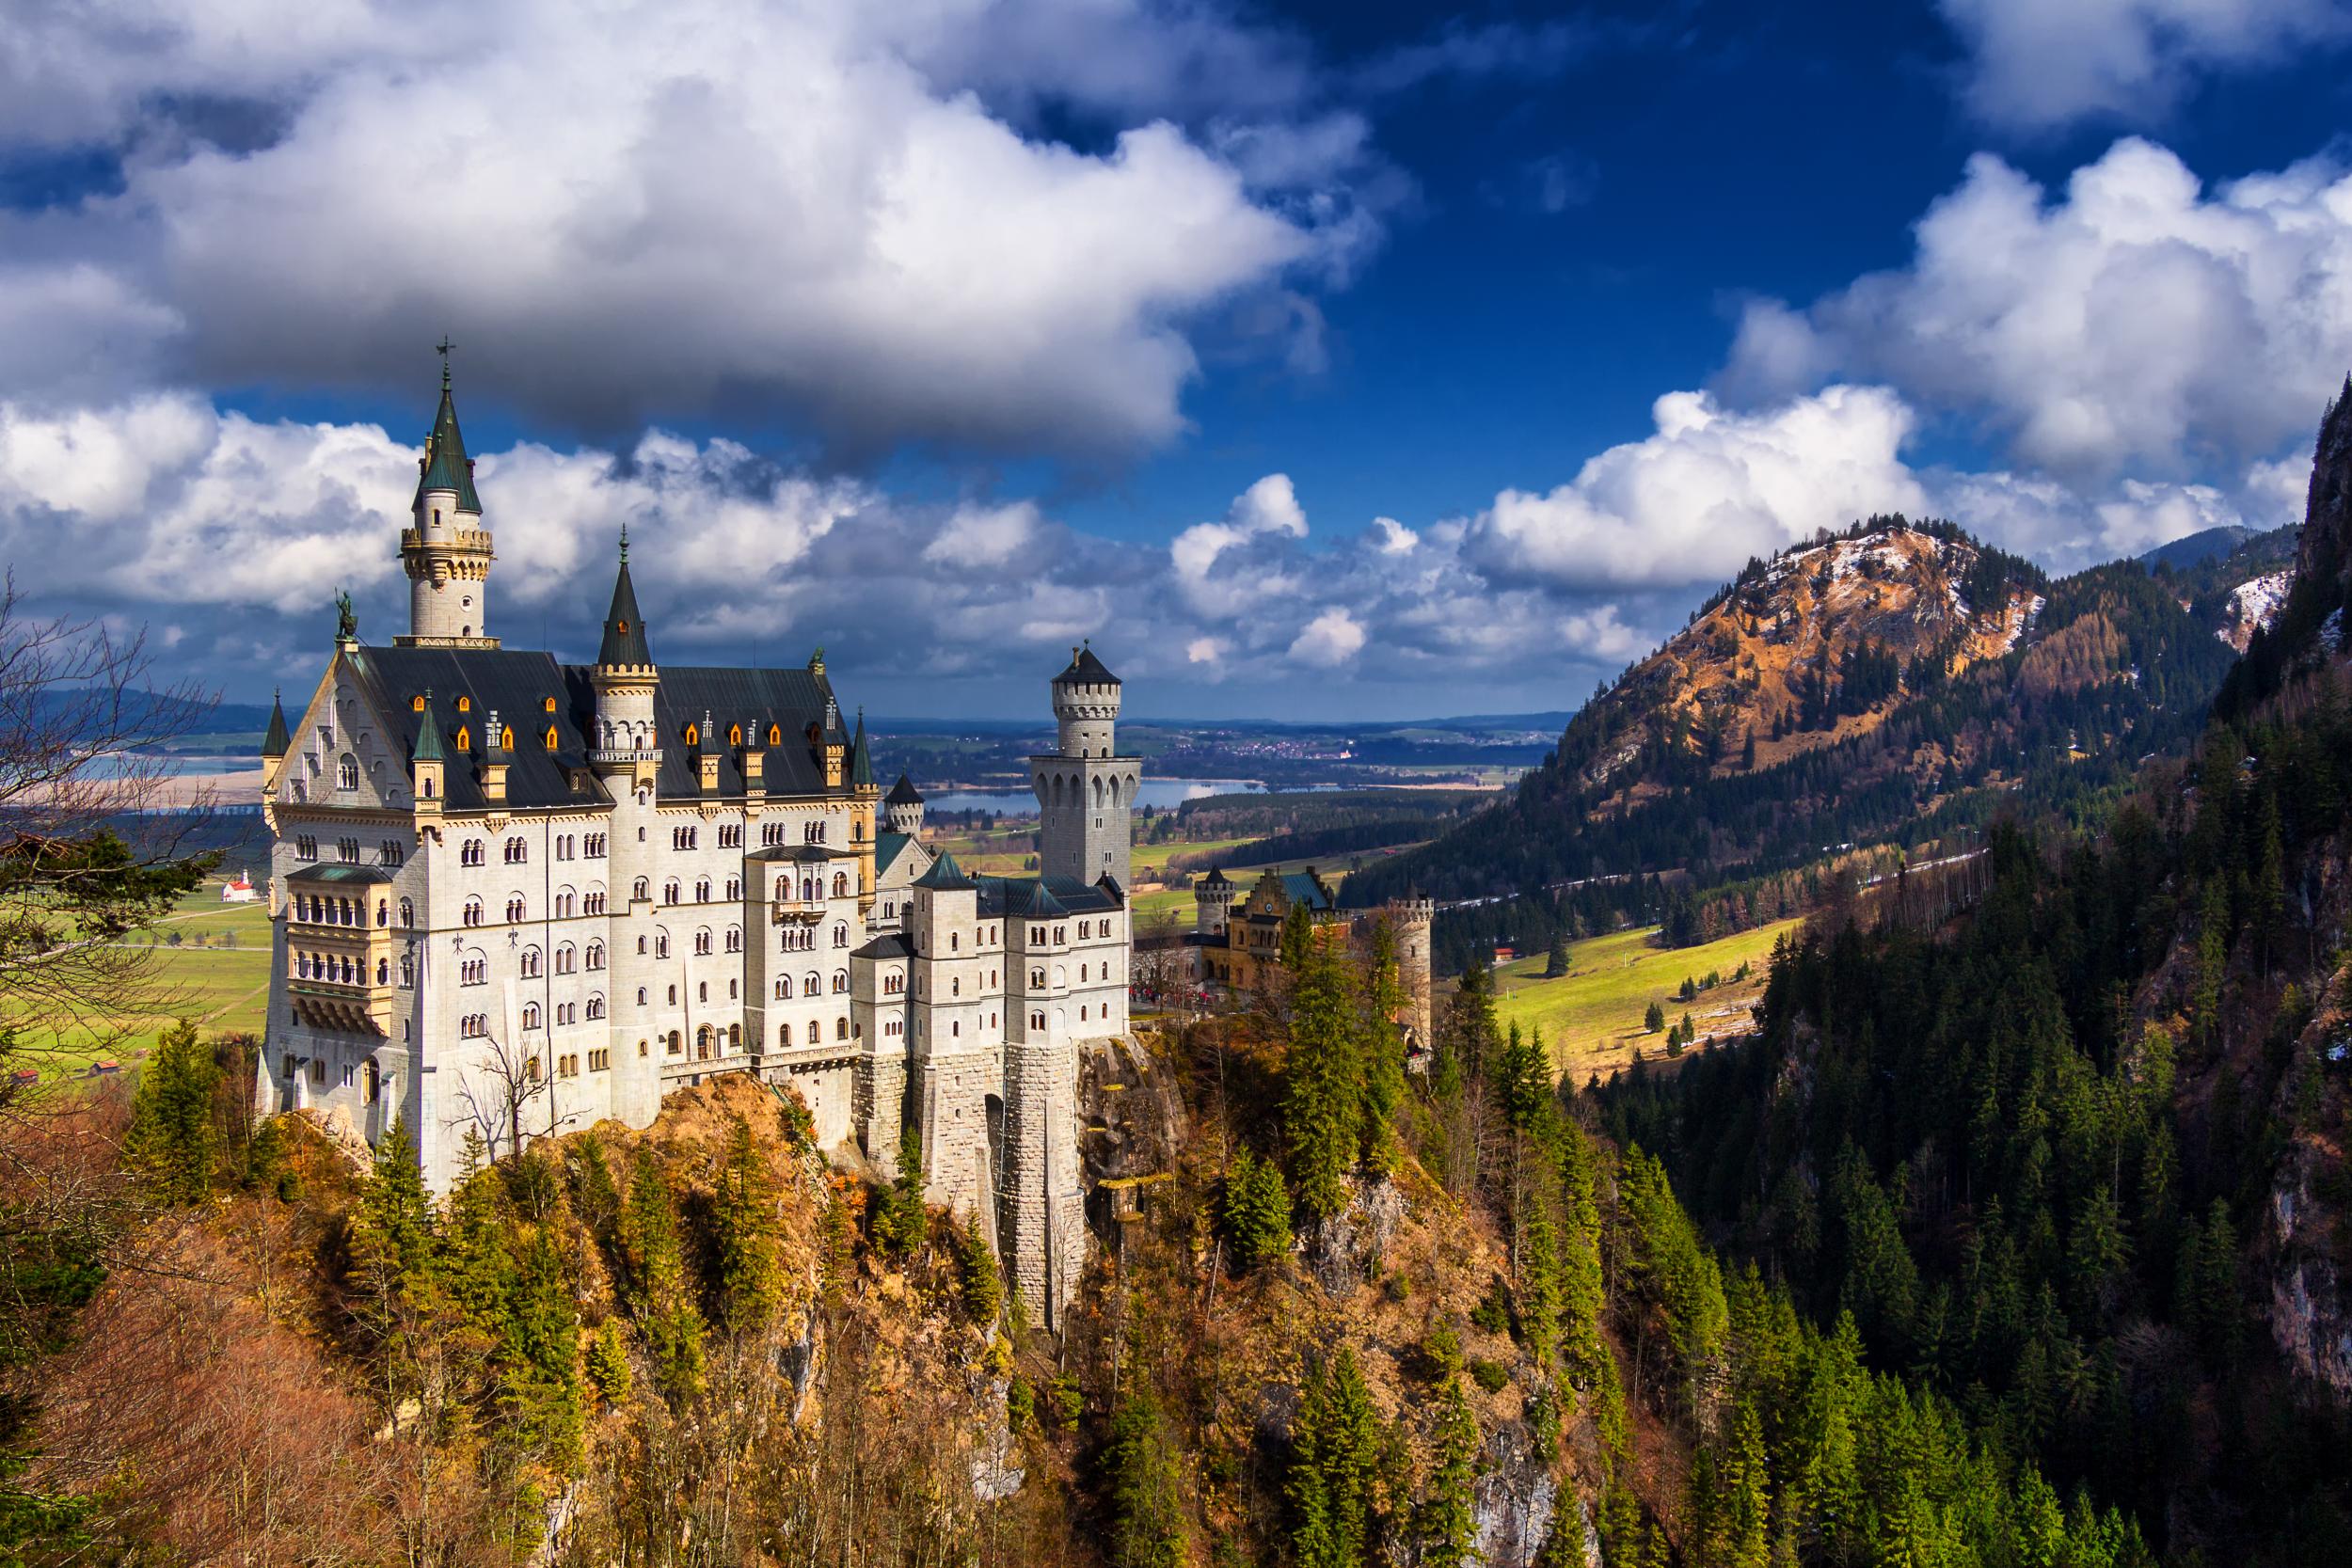 Germany’s Neuschwanstein Castle would make a magnificent pitstop